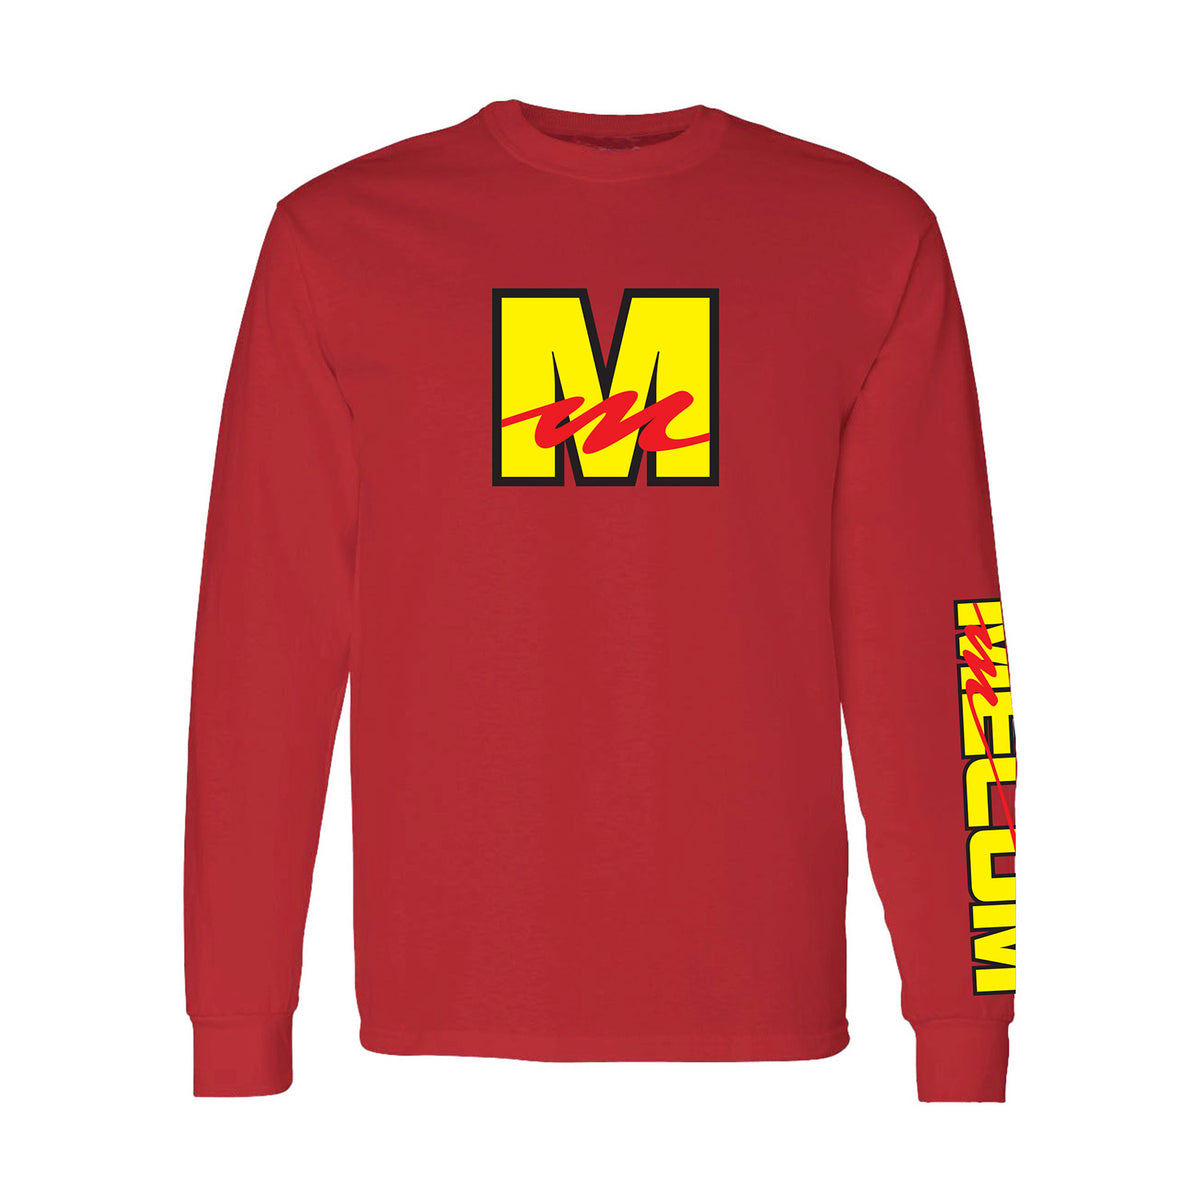 Mecum Auctions Red Logo Long Sleeve T-Shirt - Front View